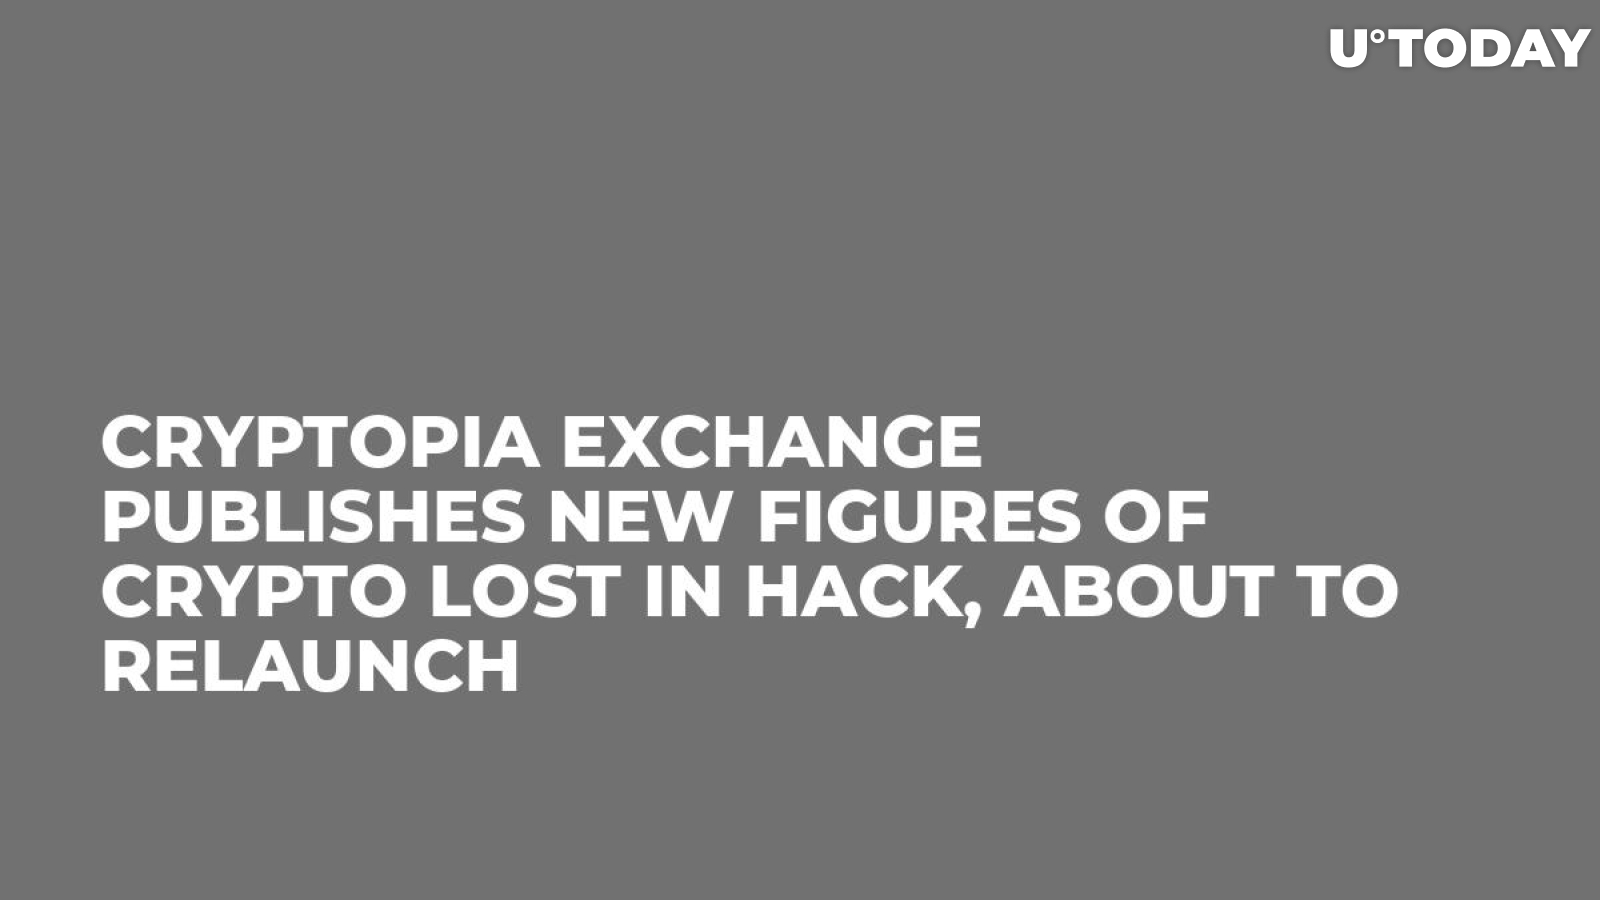 Cryptopia Exchange Publishes New Figures of Crypto Lost in Hack, About to Relaunch